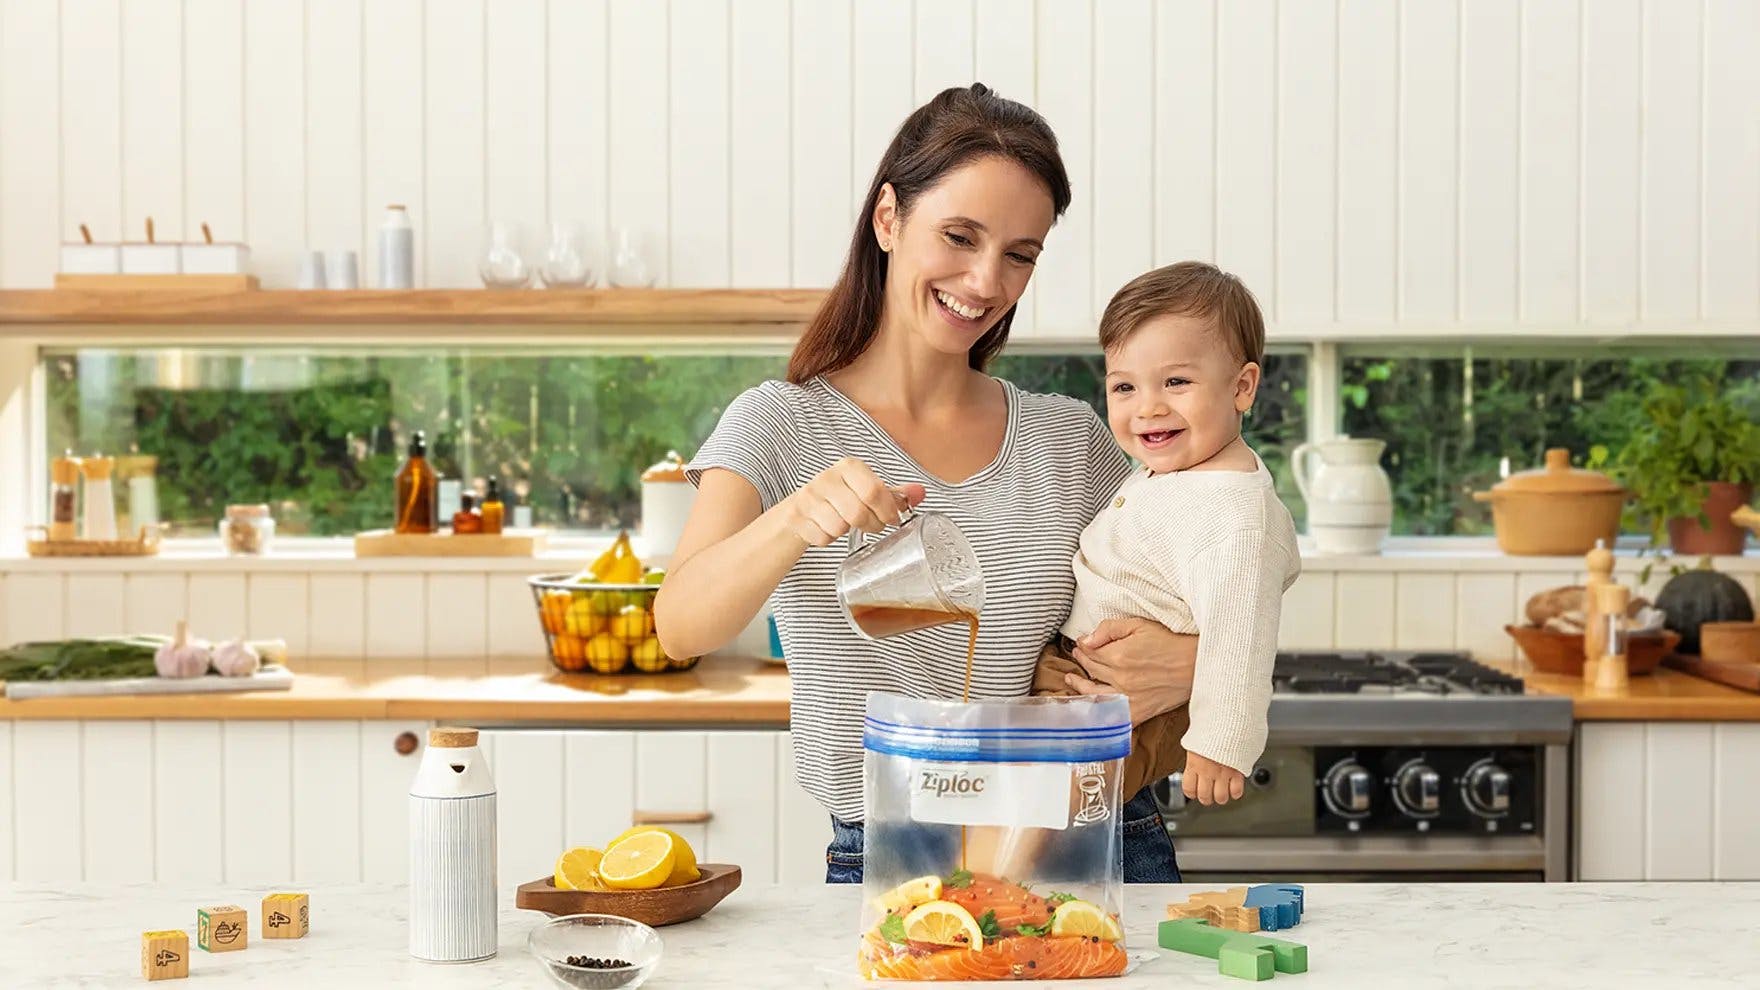 Mother holding a baby and pouring marinade into a Ziploc bag of salmon